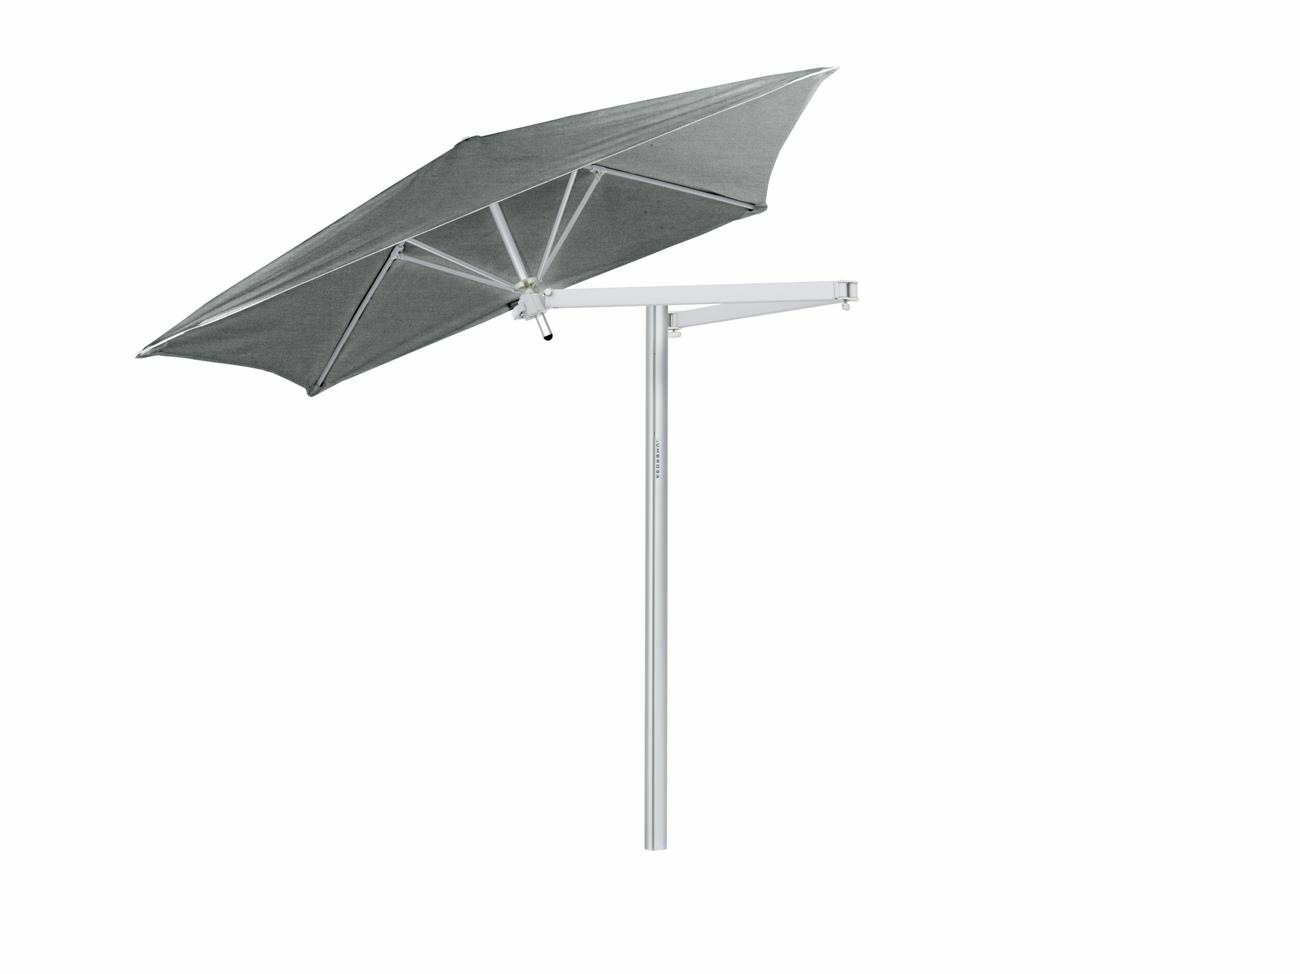 Paraflex cantilever umbrella square 1,9 m with Flanelle fabric and a Neo arm